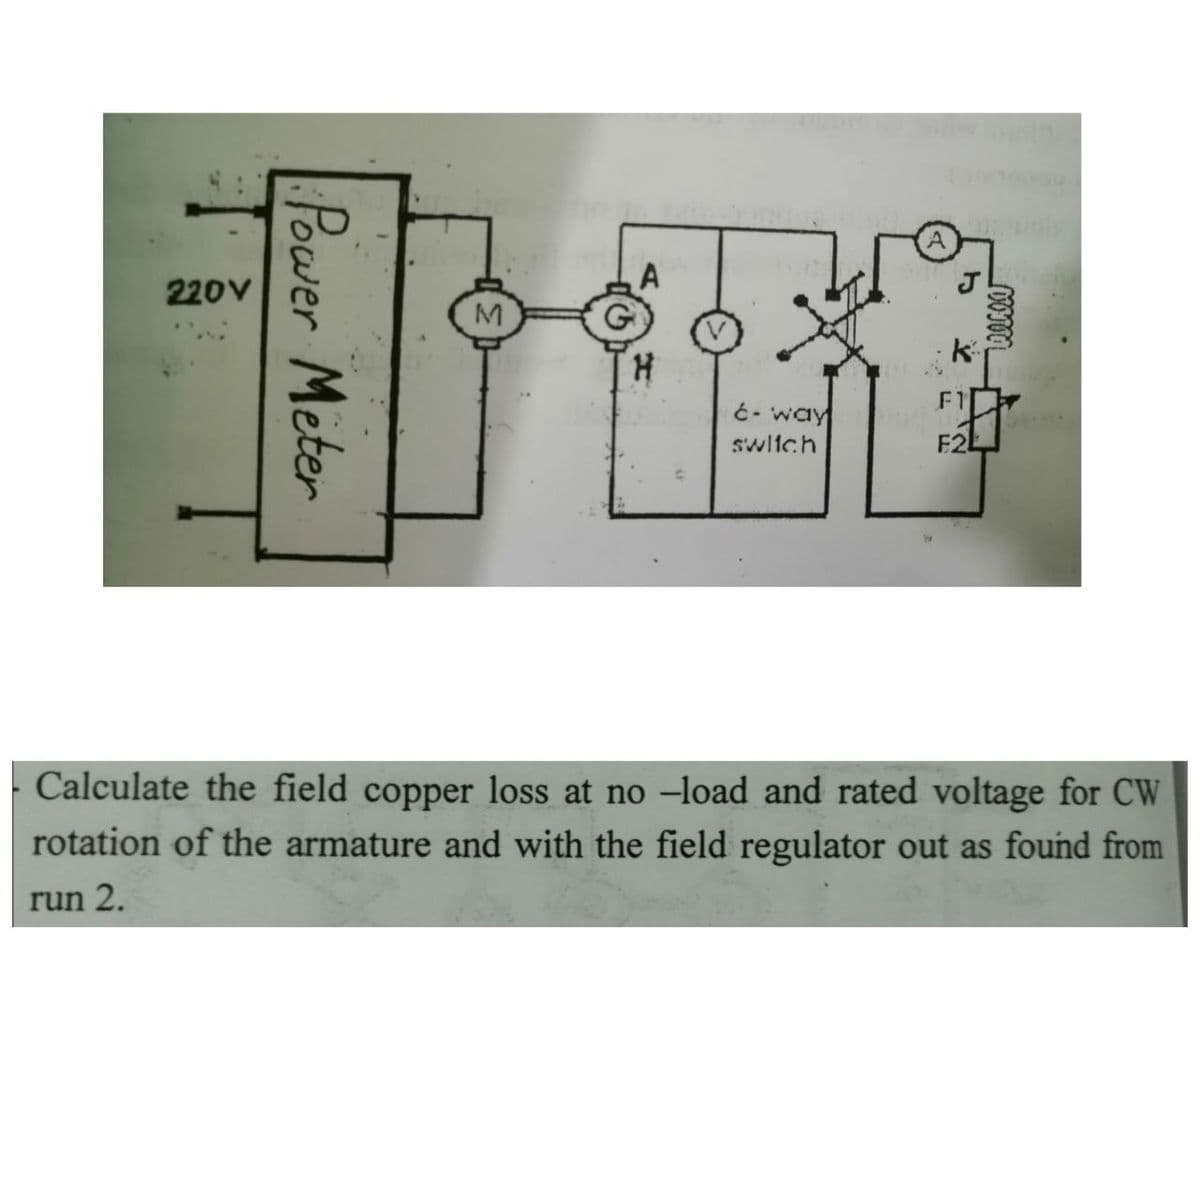 220V
F1
ć- way
swltch
F2L
Calculate the field copper loss at no –load and rated voltage for CW
rotation of the armature and with the field regulator out as found from
run 2.
Power Meter
